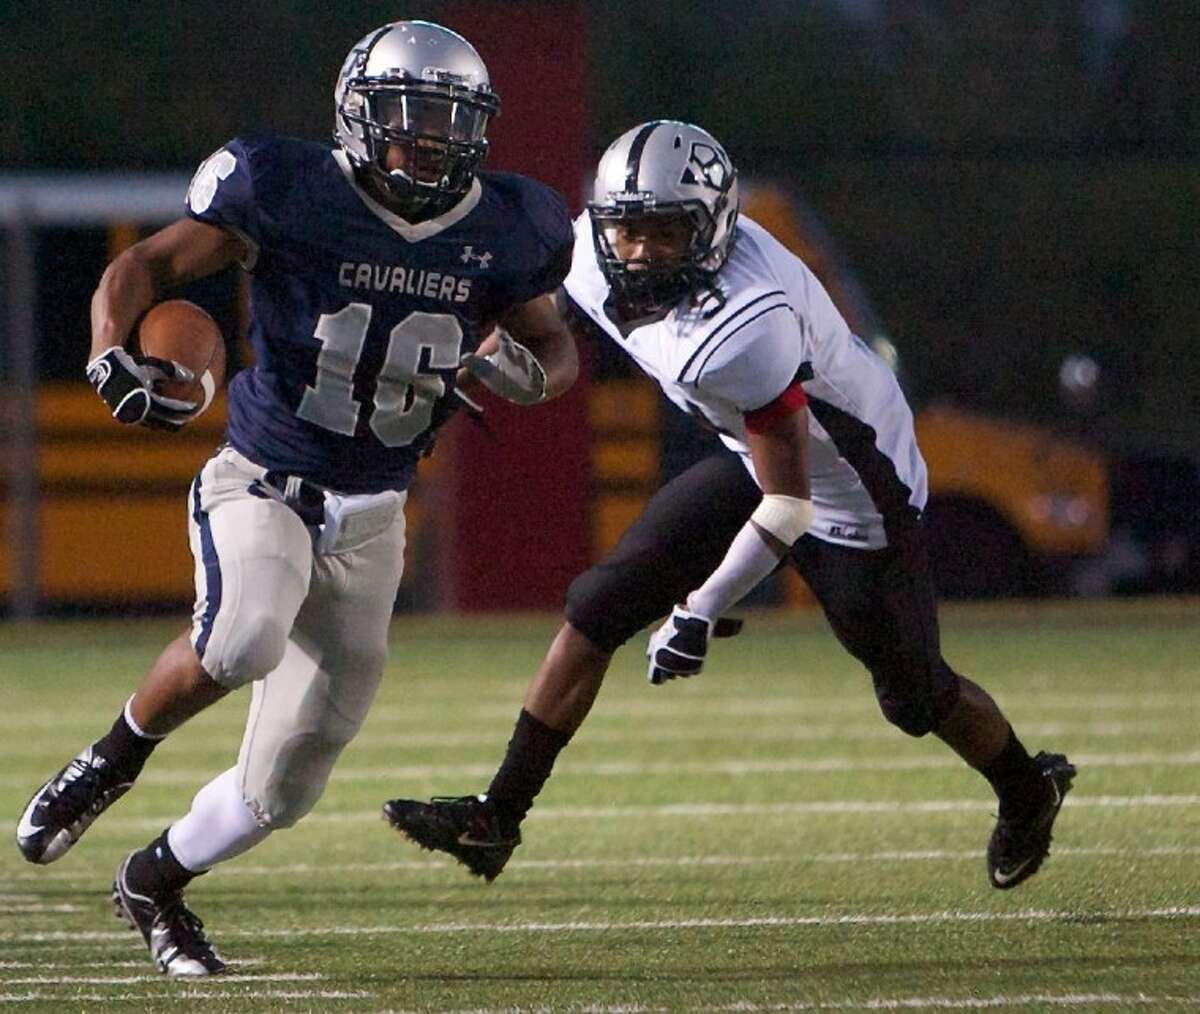 College Park’s Nicholas Black gets by a Clear Brook defender during Thursday night’s game at Woodforest Bank Stadium in Shenandoah.